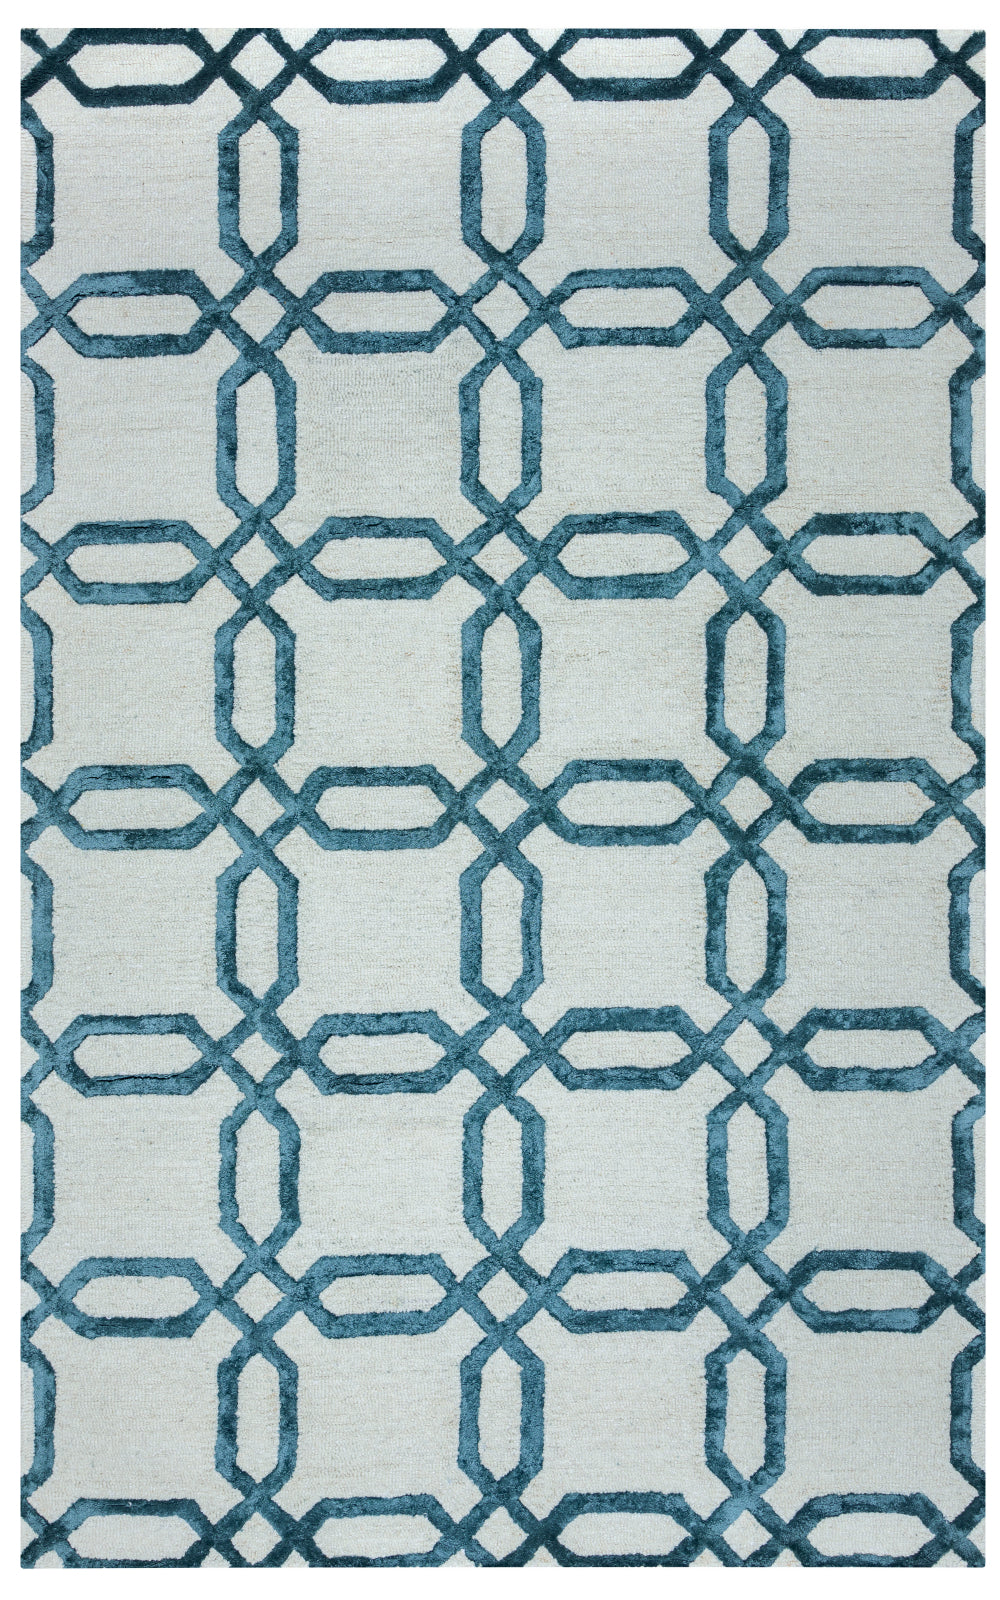 Rizzy Eden Harbor EH8811 Blue Area Rug main image